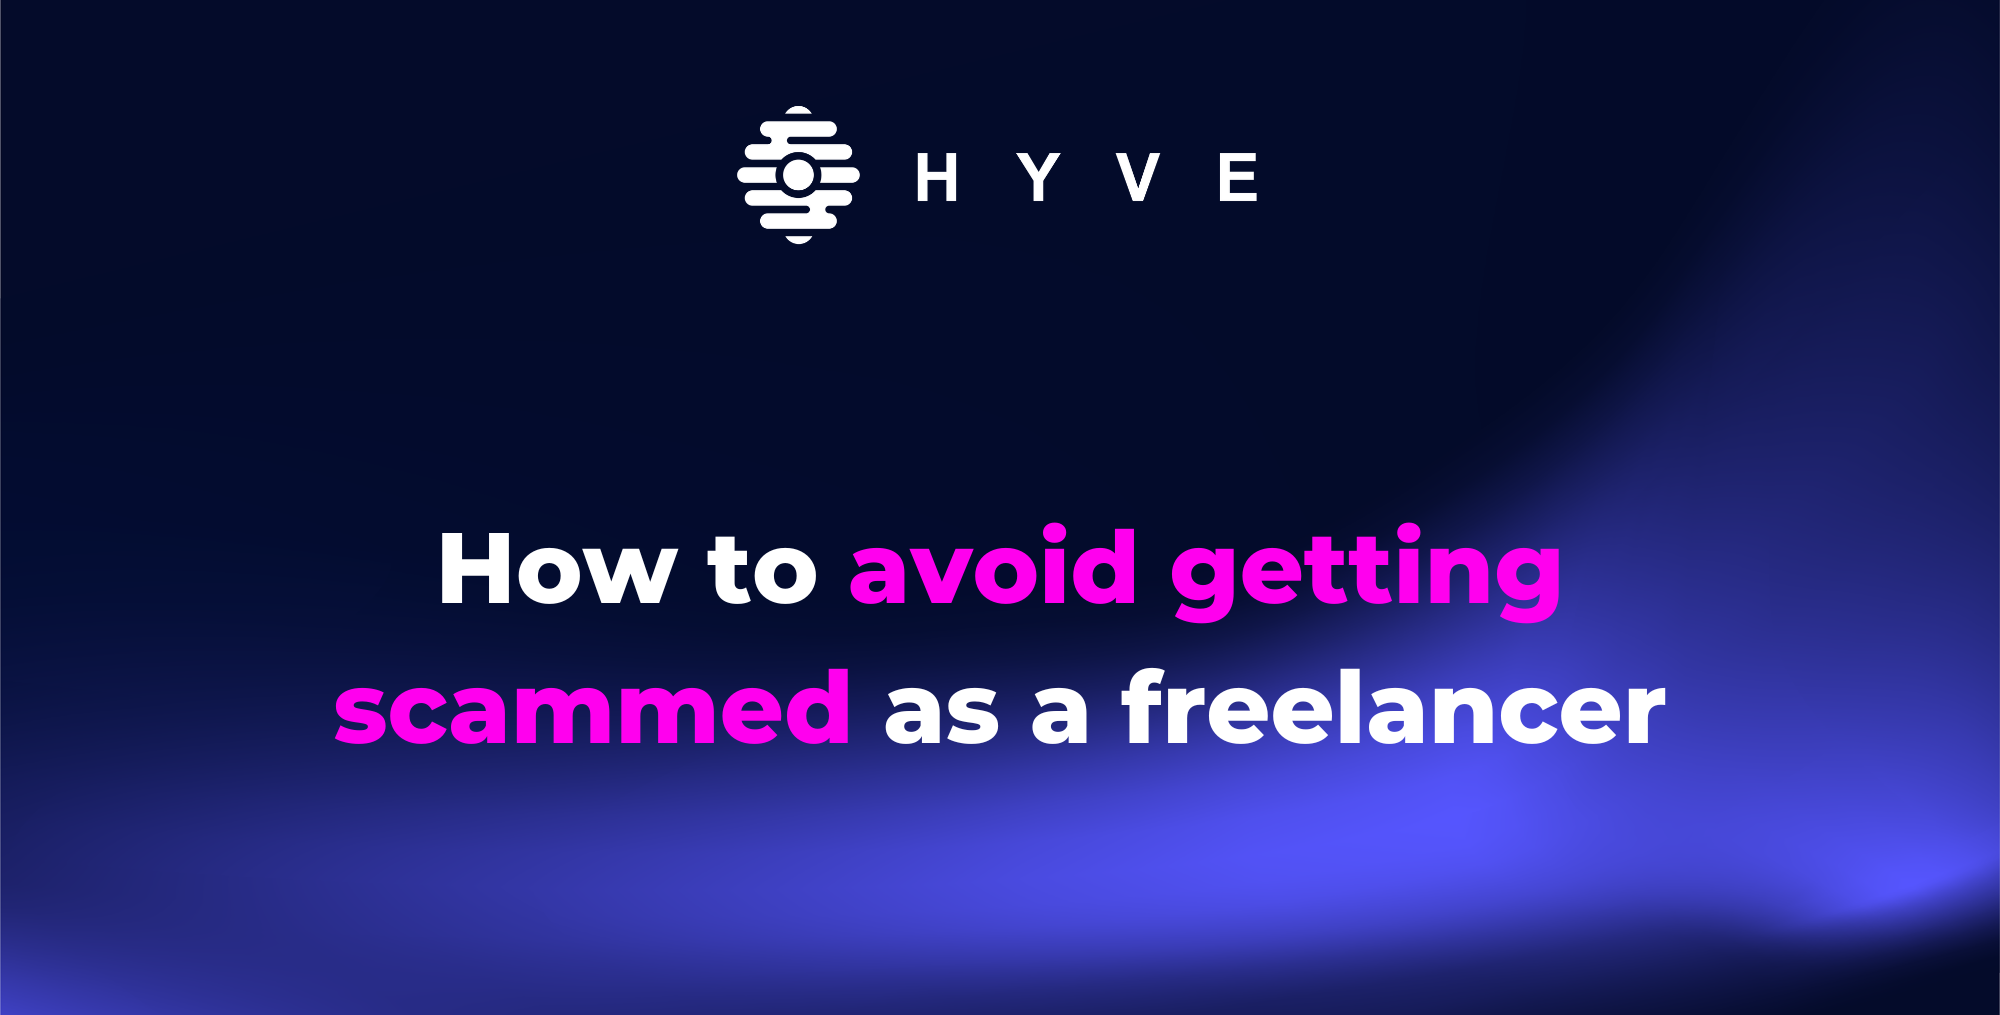 How to avoid getting scammed as a freelancer